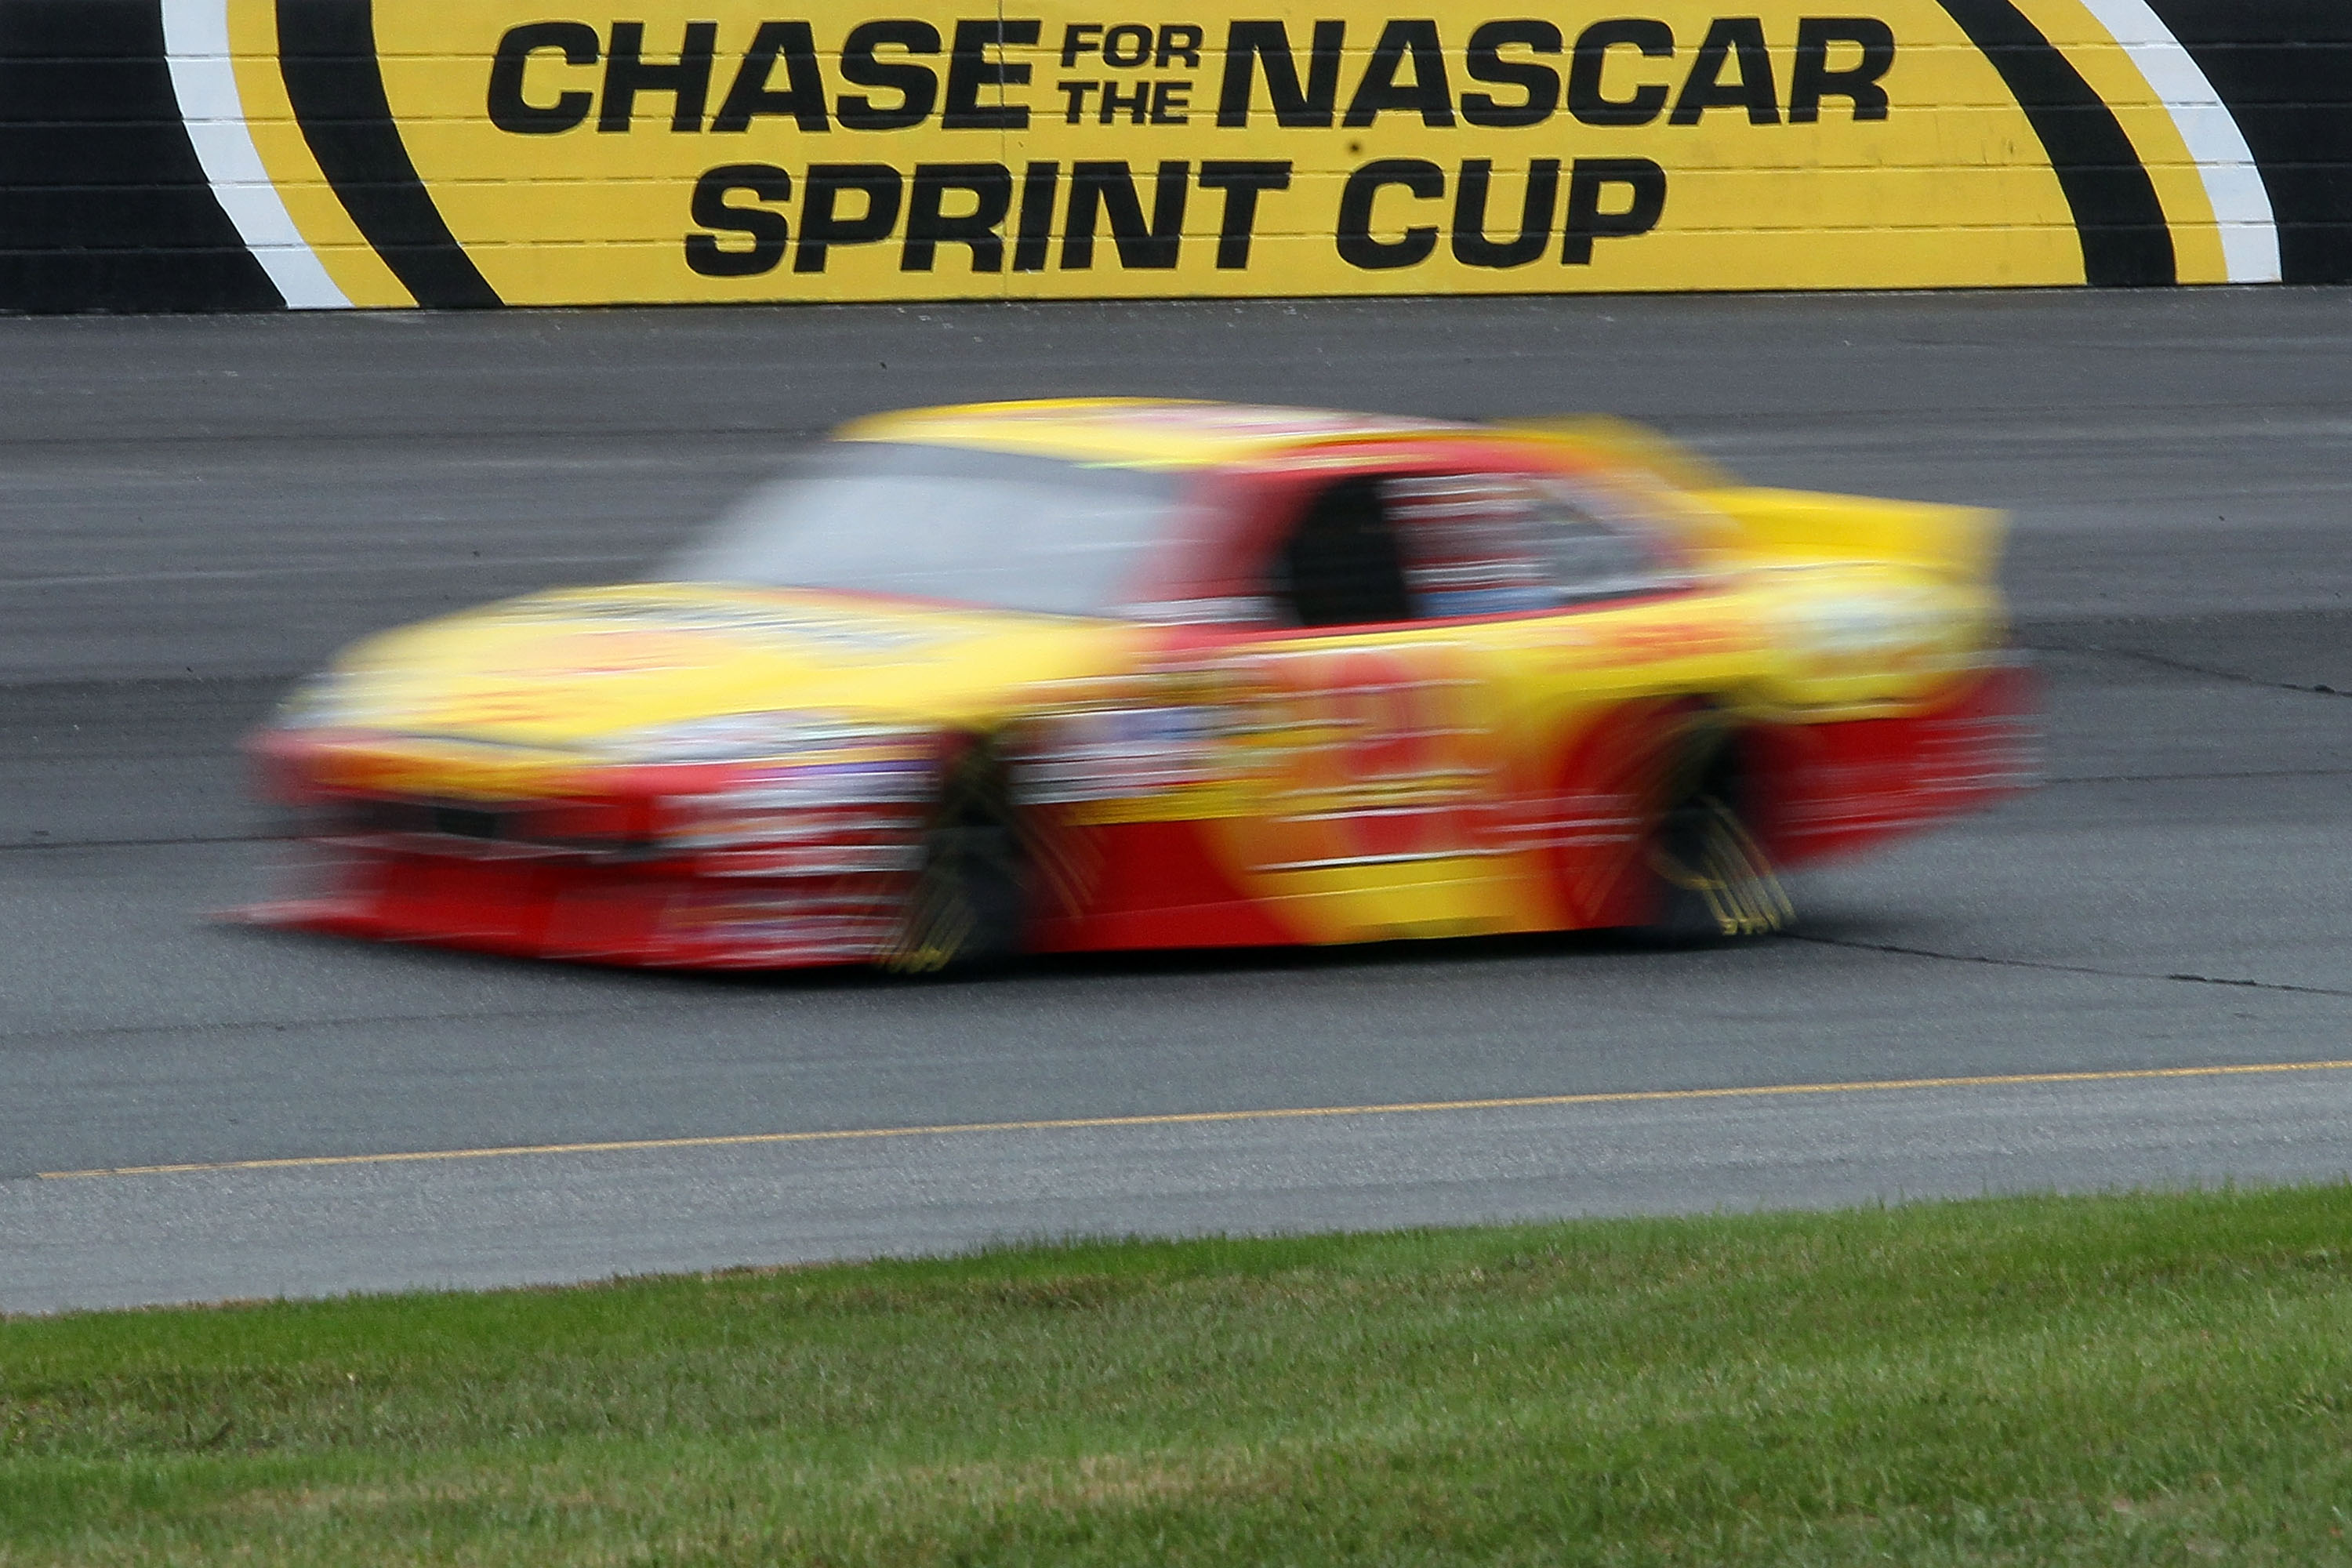 LOUDON, NH - SEPTEMBER 17:  Kevin Harvick, driver of the #29 Shell/Pennzoil Chevrolet, drives on track during practice for the NASCAR Sprint Cup Series Sylvania 300 at New Hampshire Motor Speedway on September 17, 2010 in Loudon, New Hampshire.  (Photo by